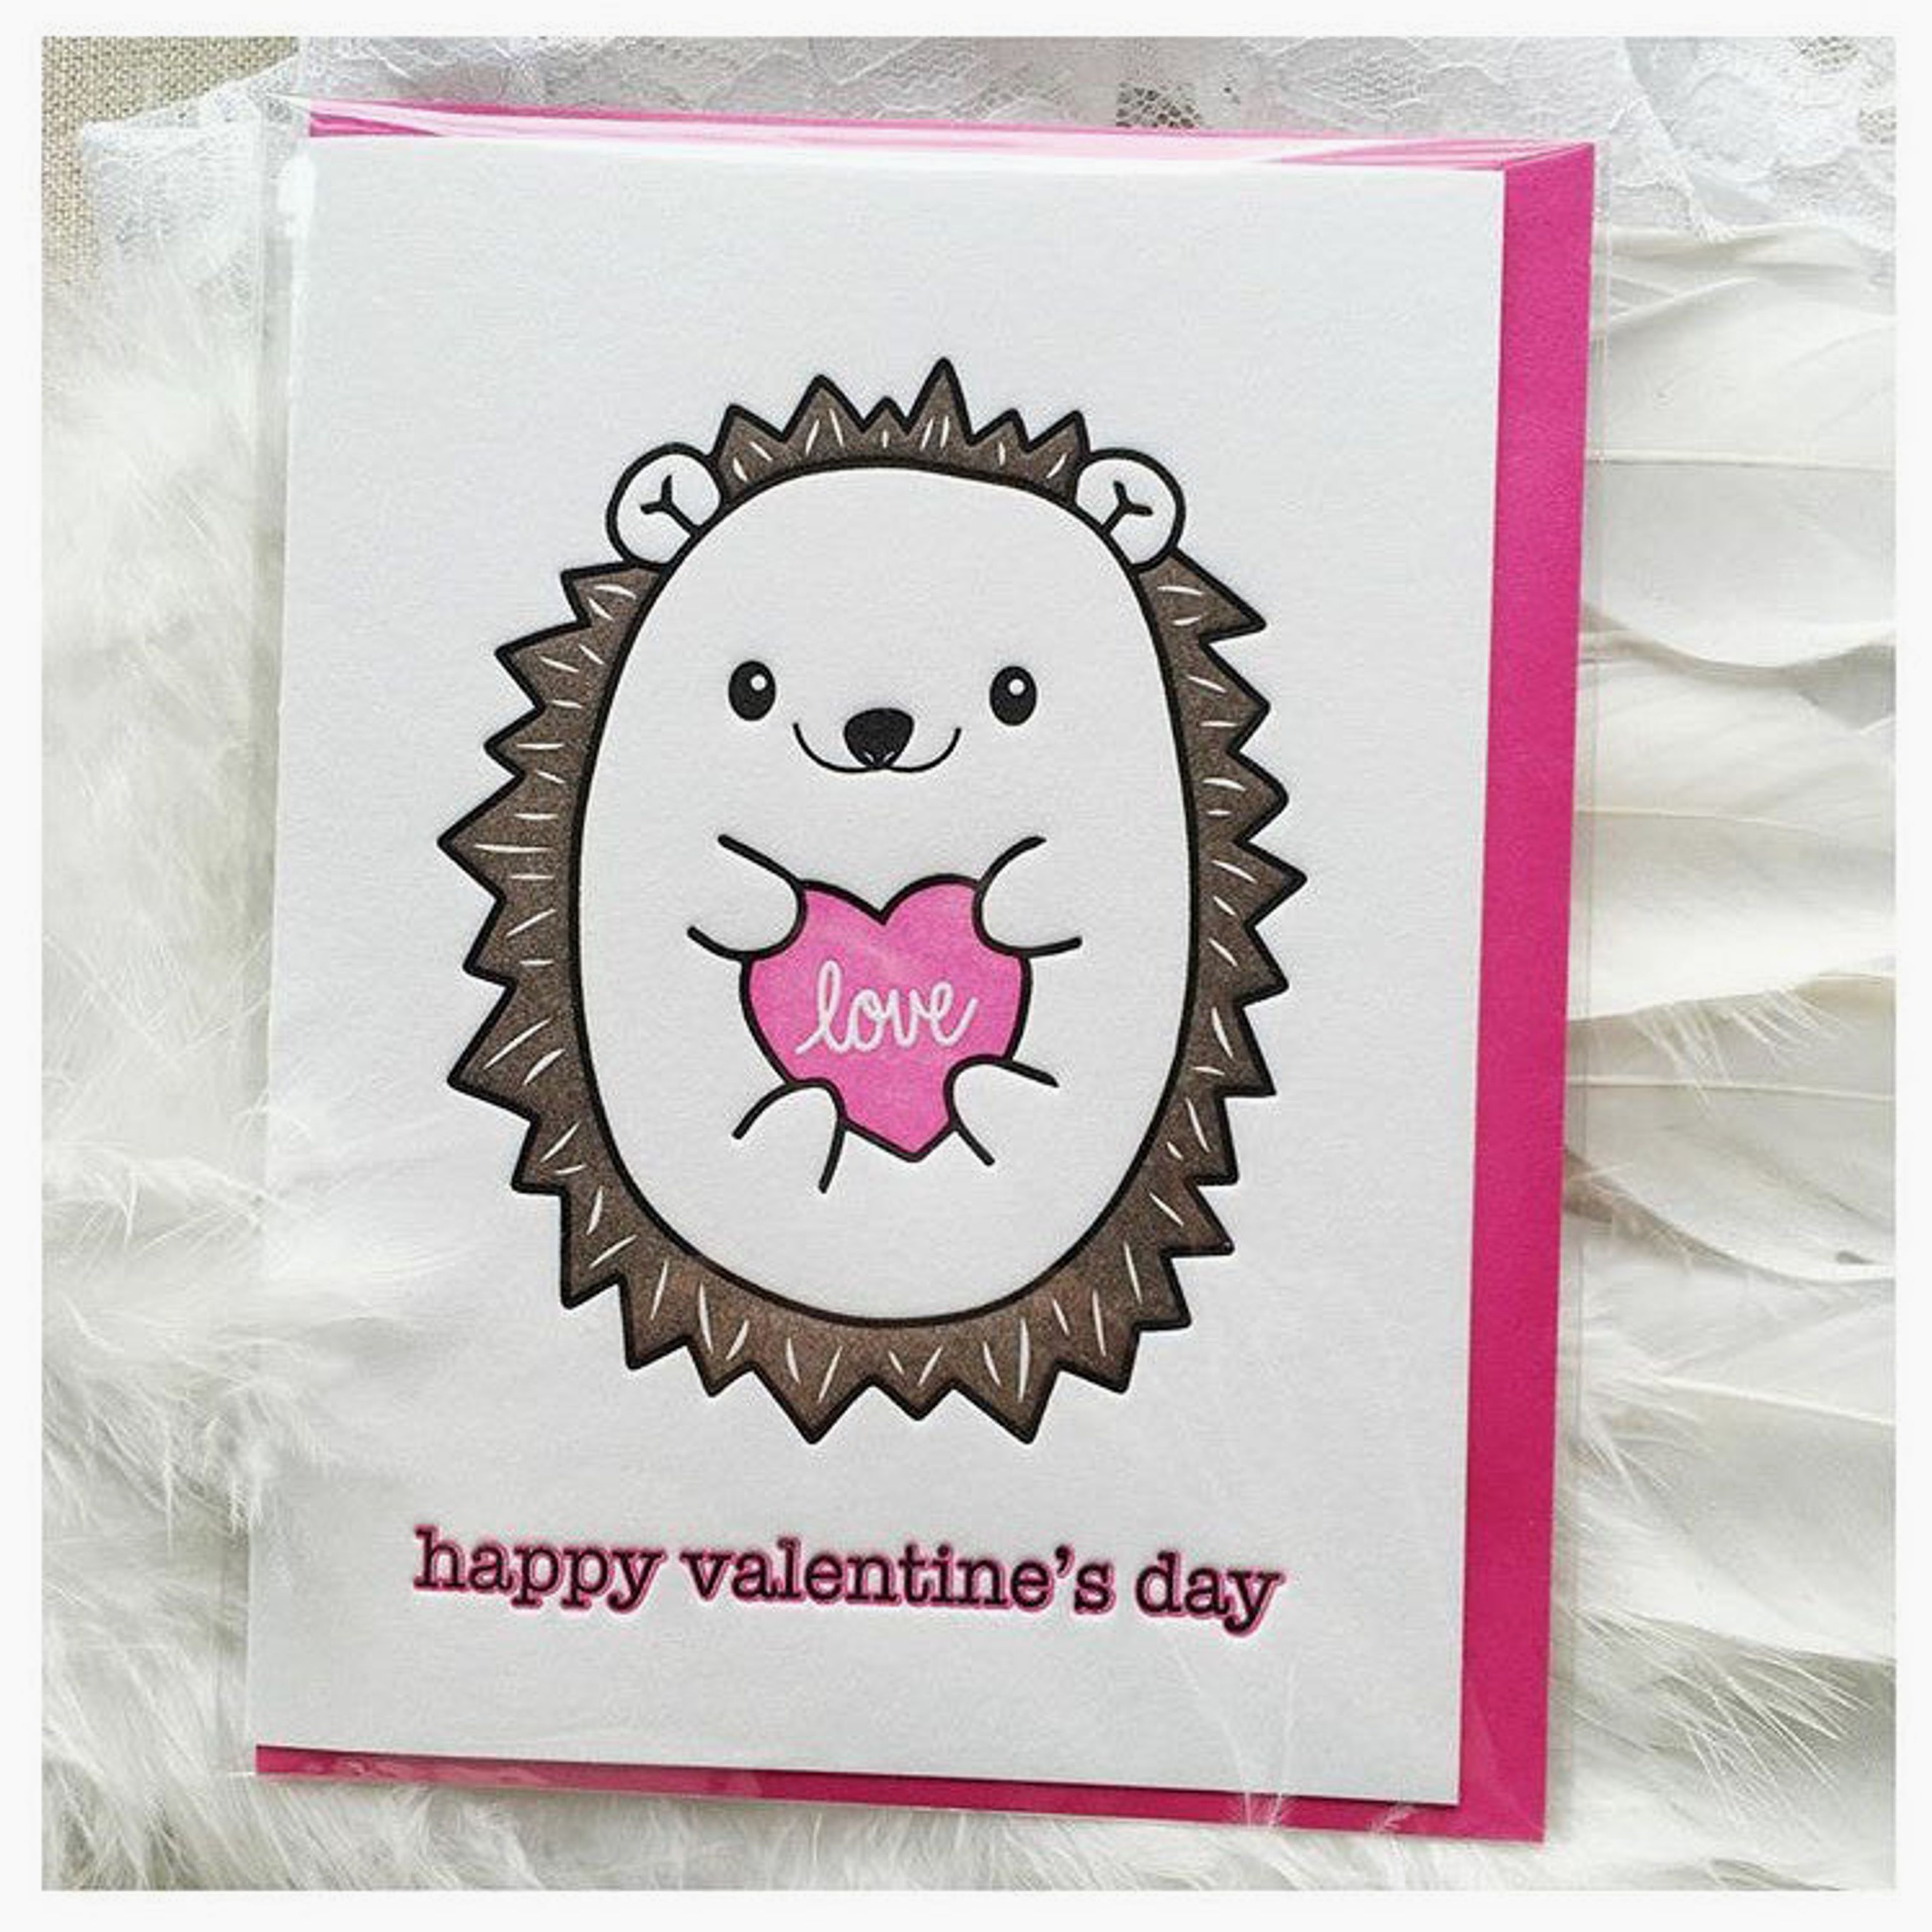 Cute Hedgehog | Love | Happy Valentine's Day Letterpress Card | kiss and punch